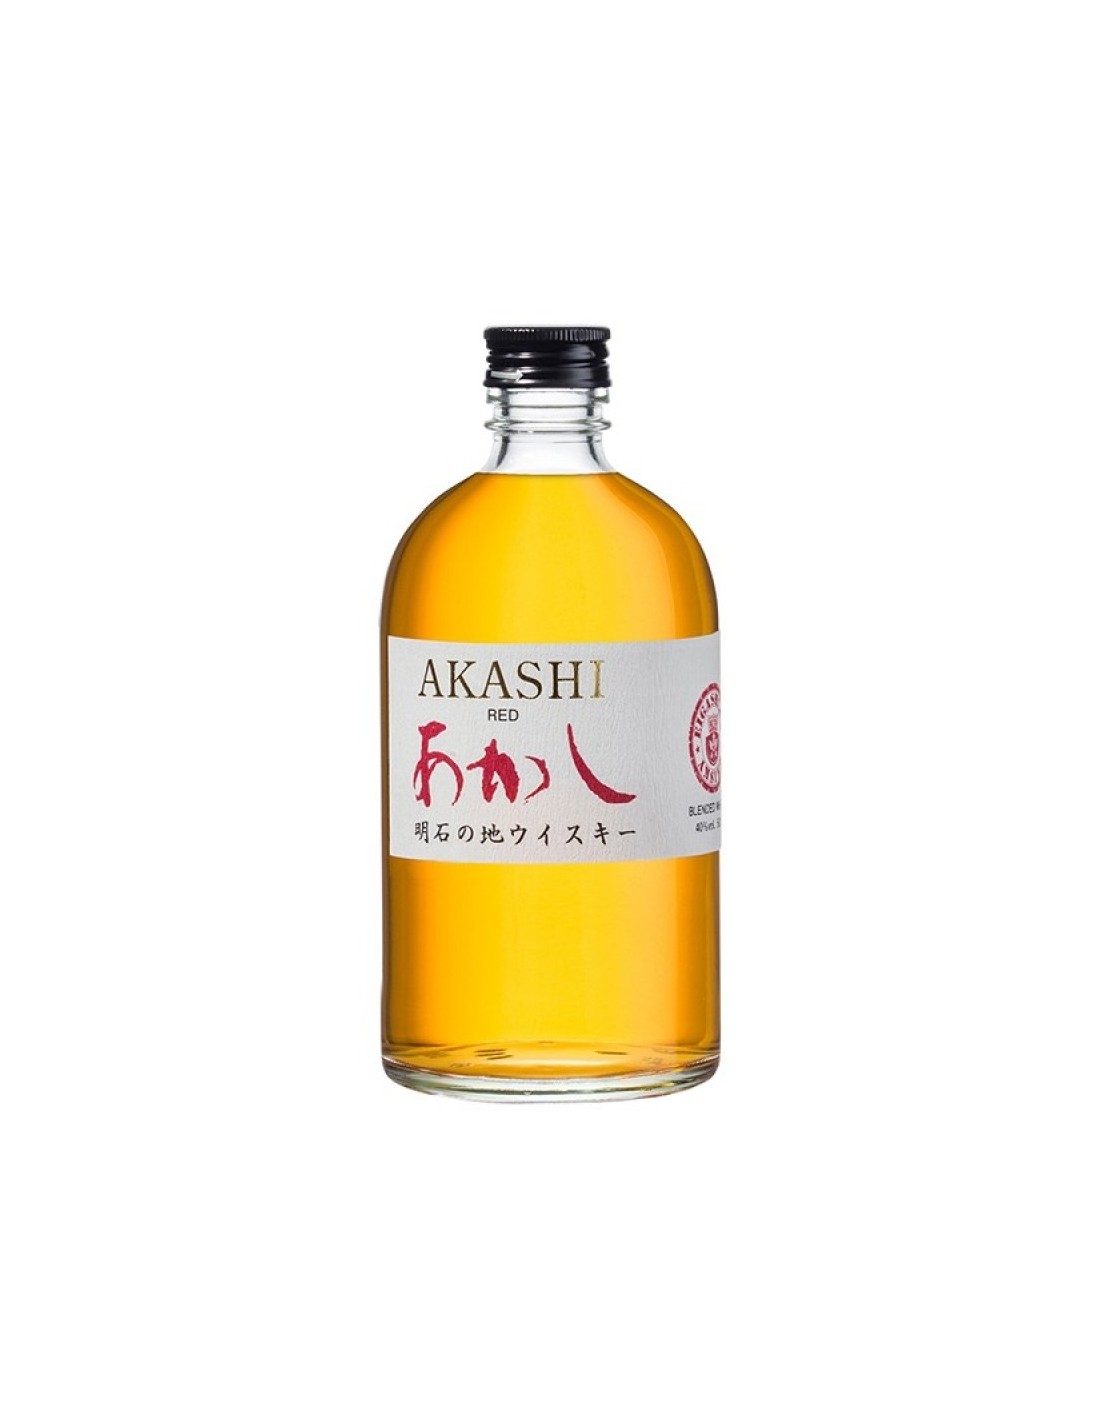 Whisky Akashi Red 0.5L, 40% alc. alcooldiscount.ro